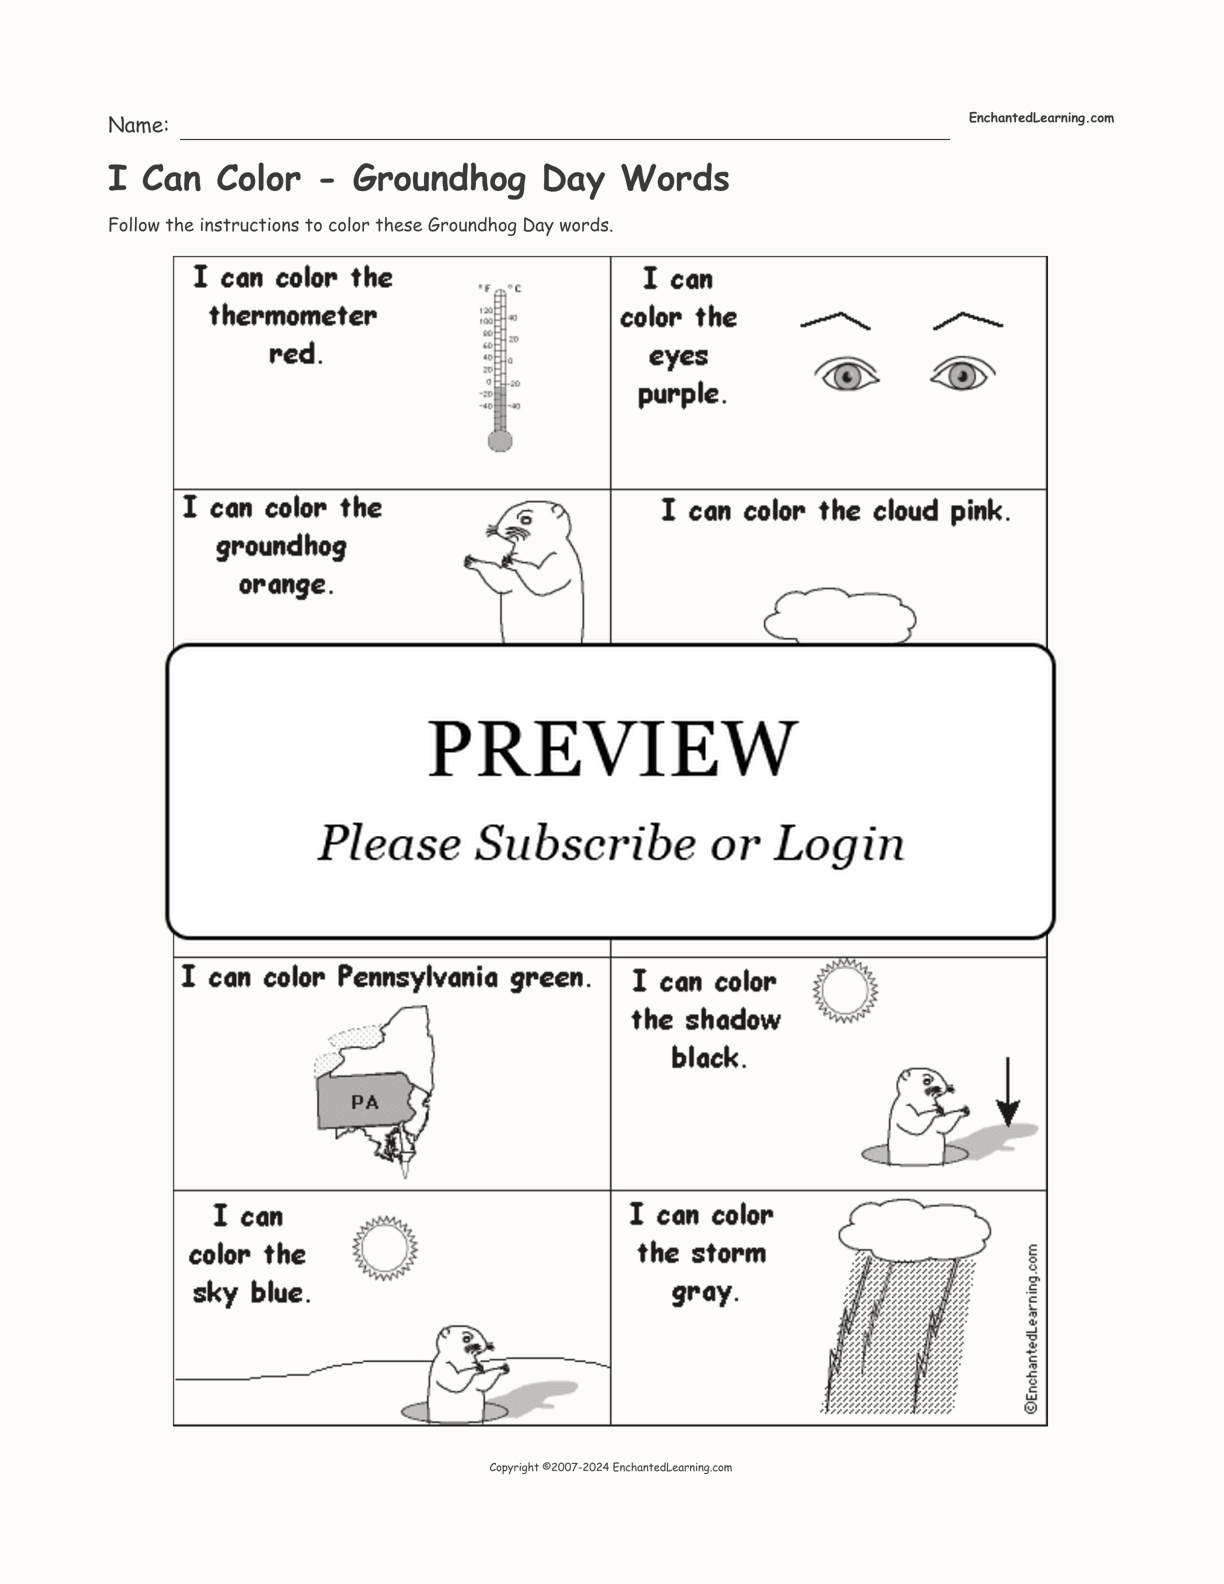 I Can Color - Groundhog Day Words interactive worksheet page 1